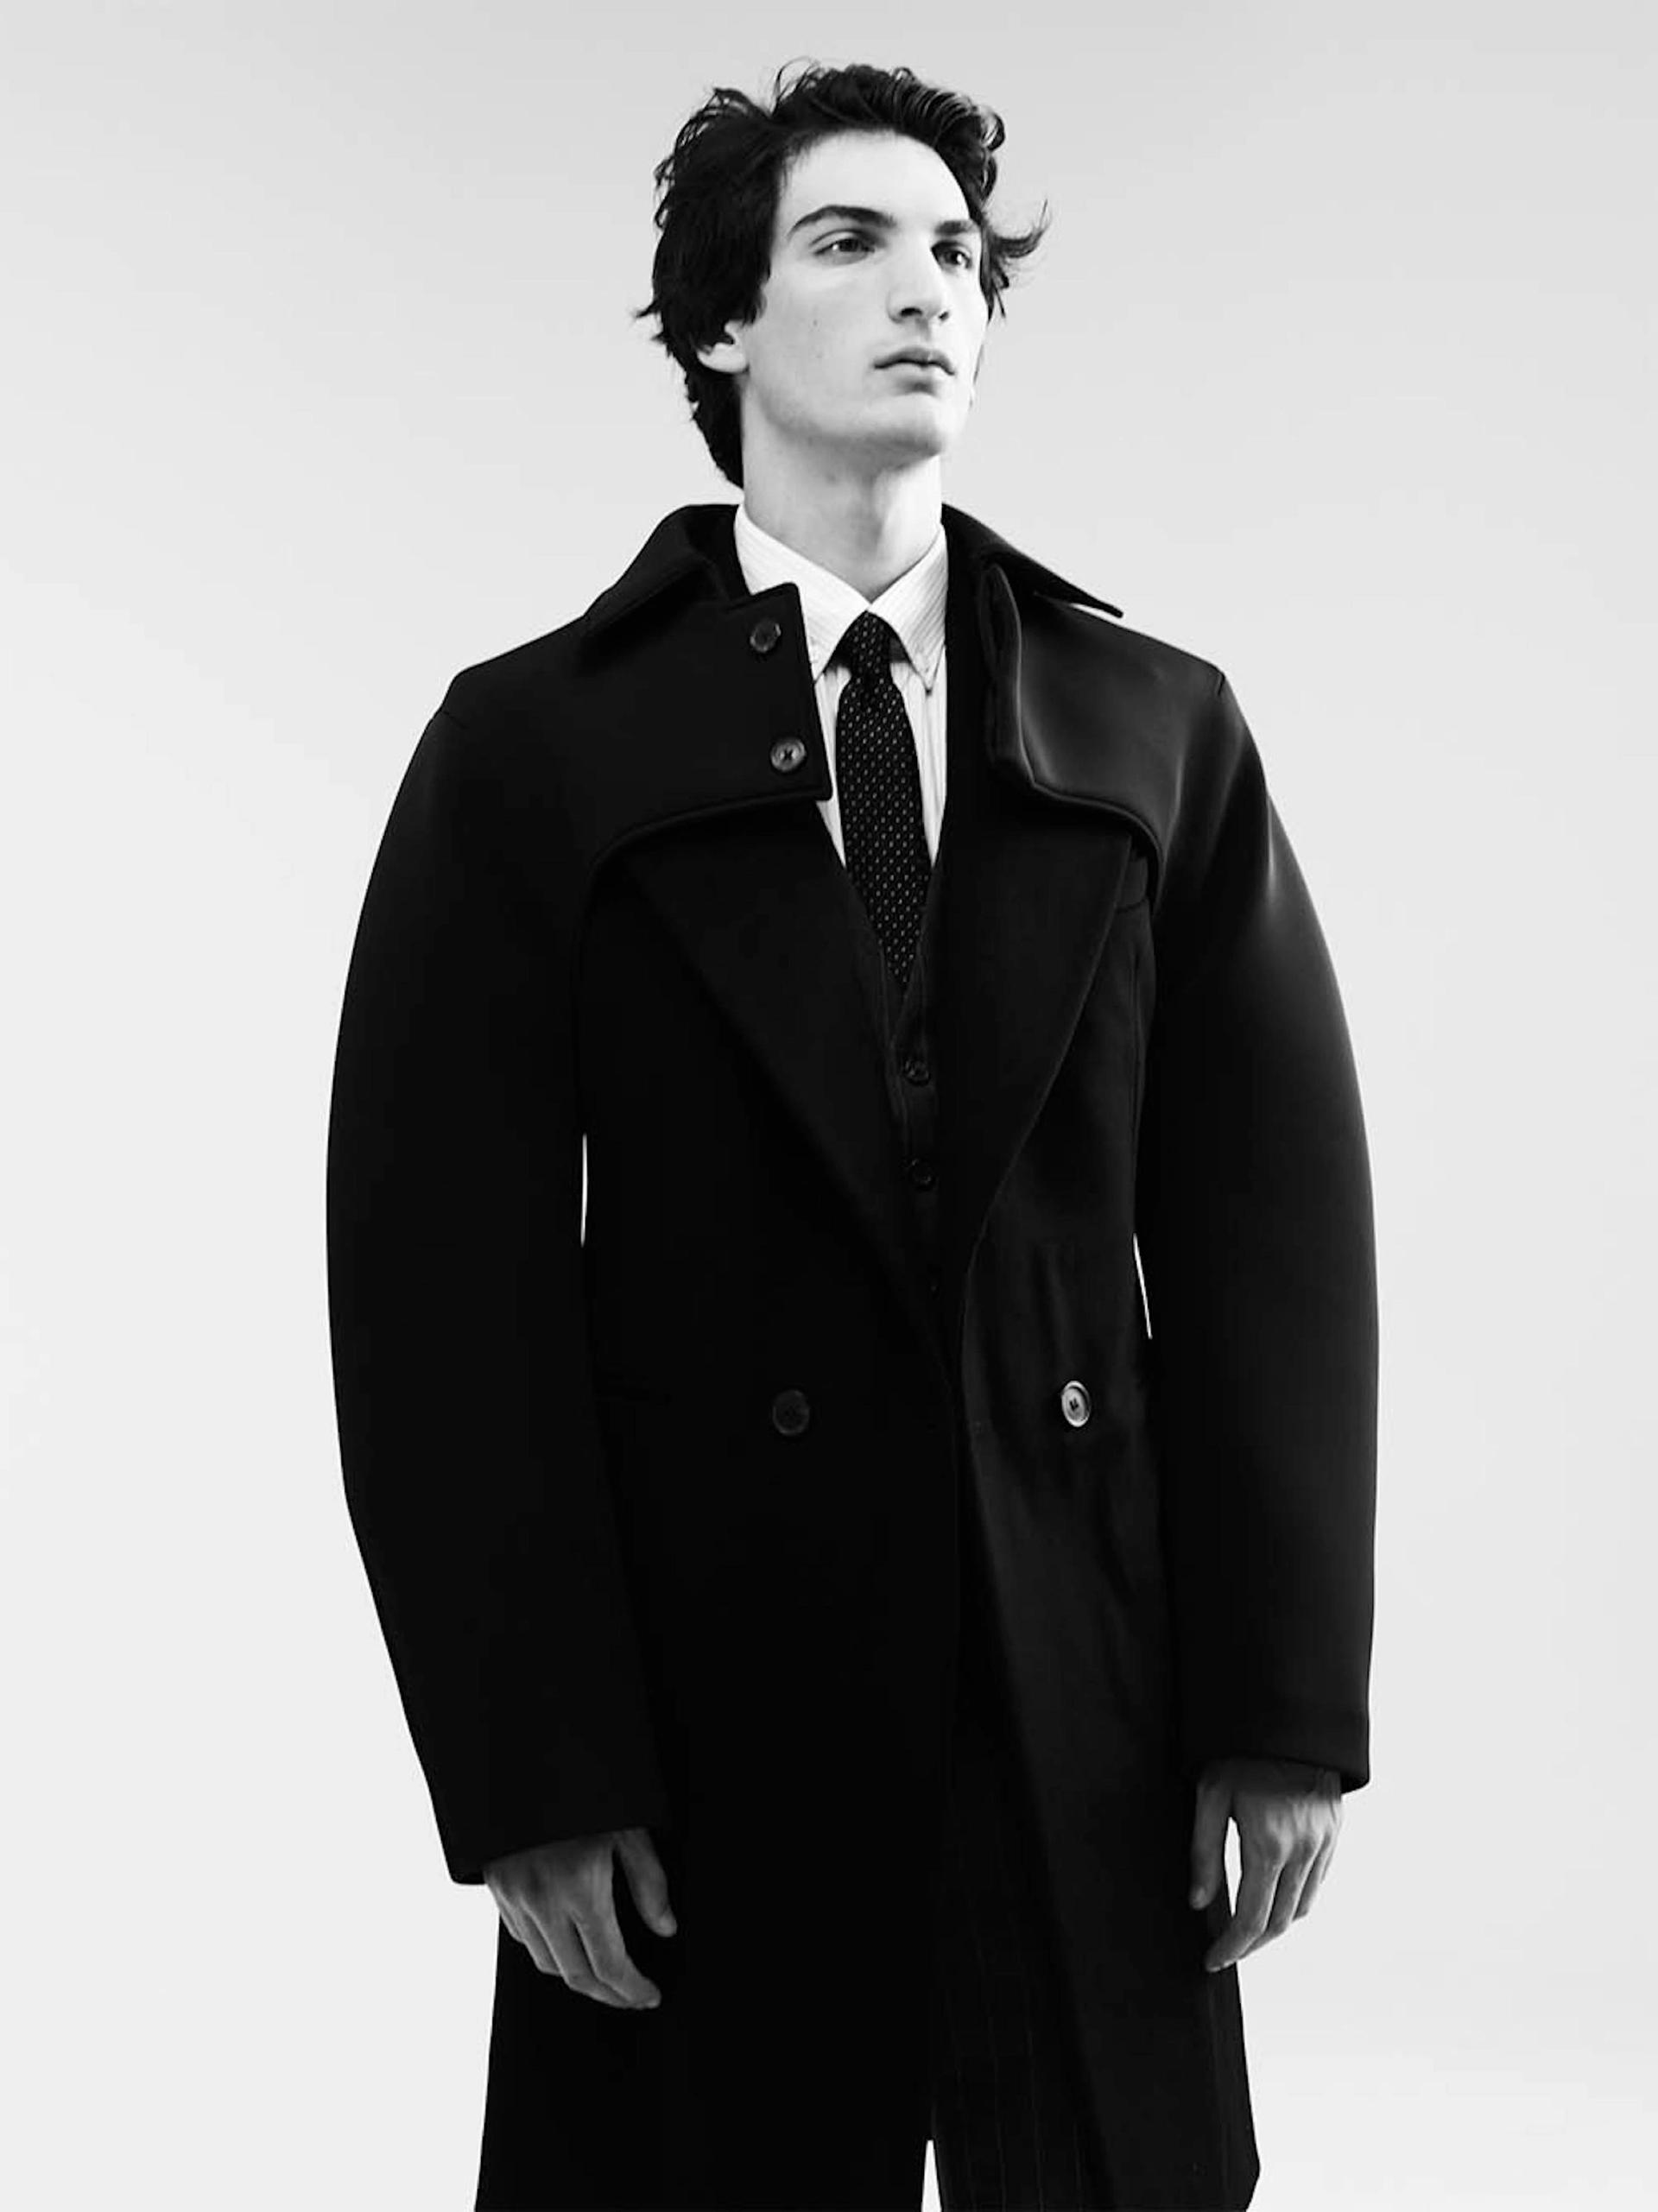 LUCA: cashmere hand-tailored coat, neoprene sleeves with collar, cotton pinstripe shirt, wool pinstripe suit vest and -trousers, silk jacquard tie: RAF SIMONS A/W 2009/2010; silver earring: RAF SIMONS A/W 2003/2004